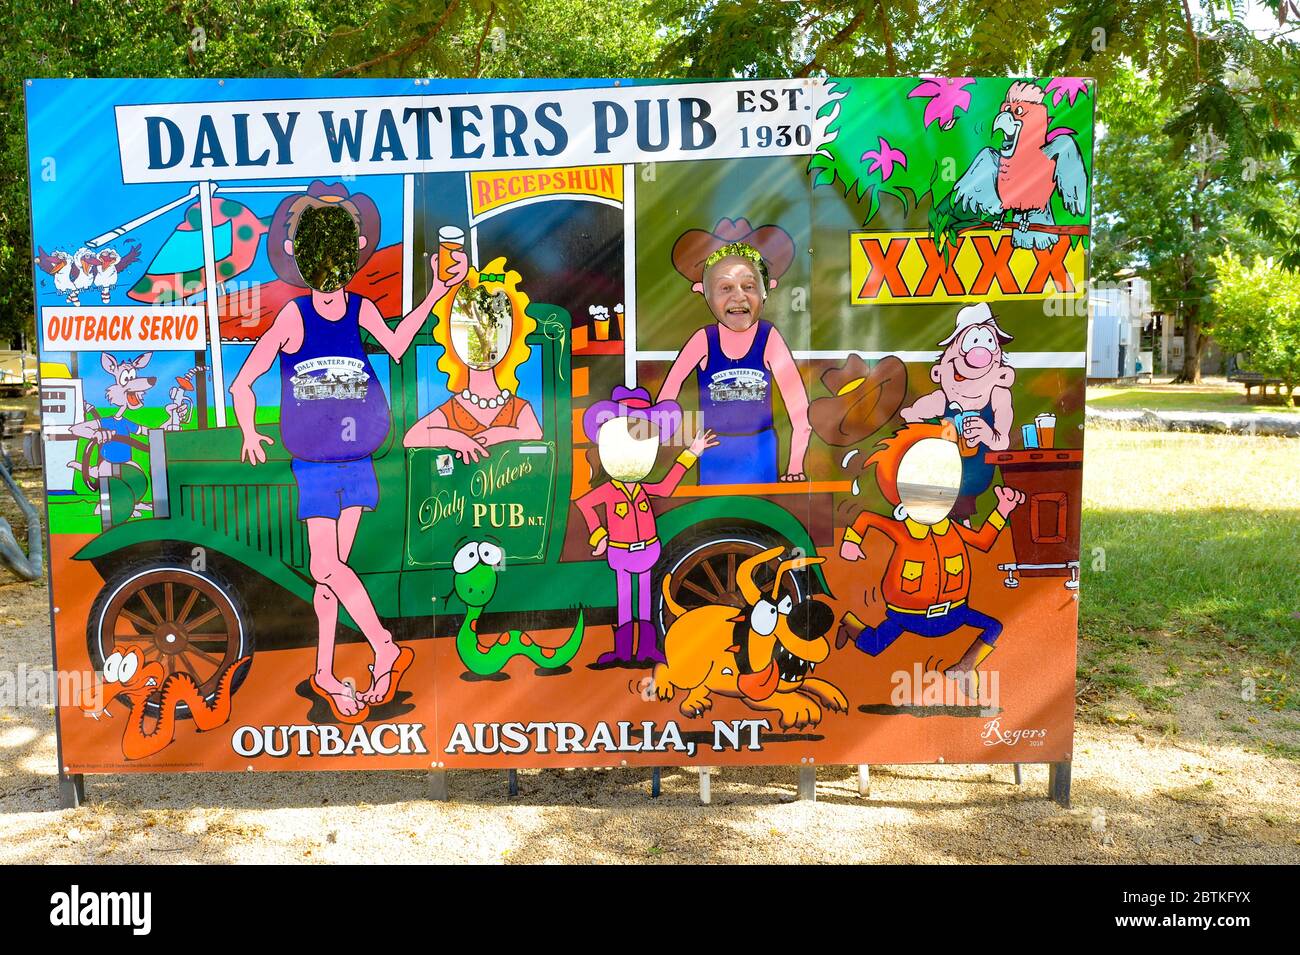 Funny cartoon board advertising for Daly Waters Pub, Northern Territory, NT, Australia Stock Photo